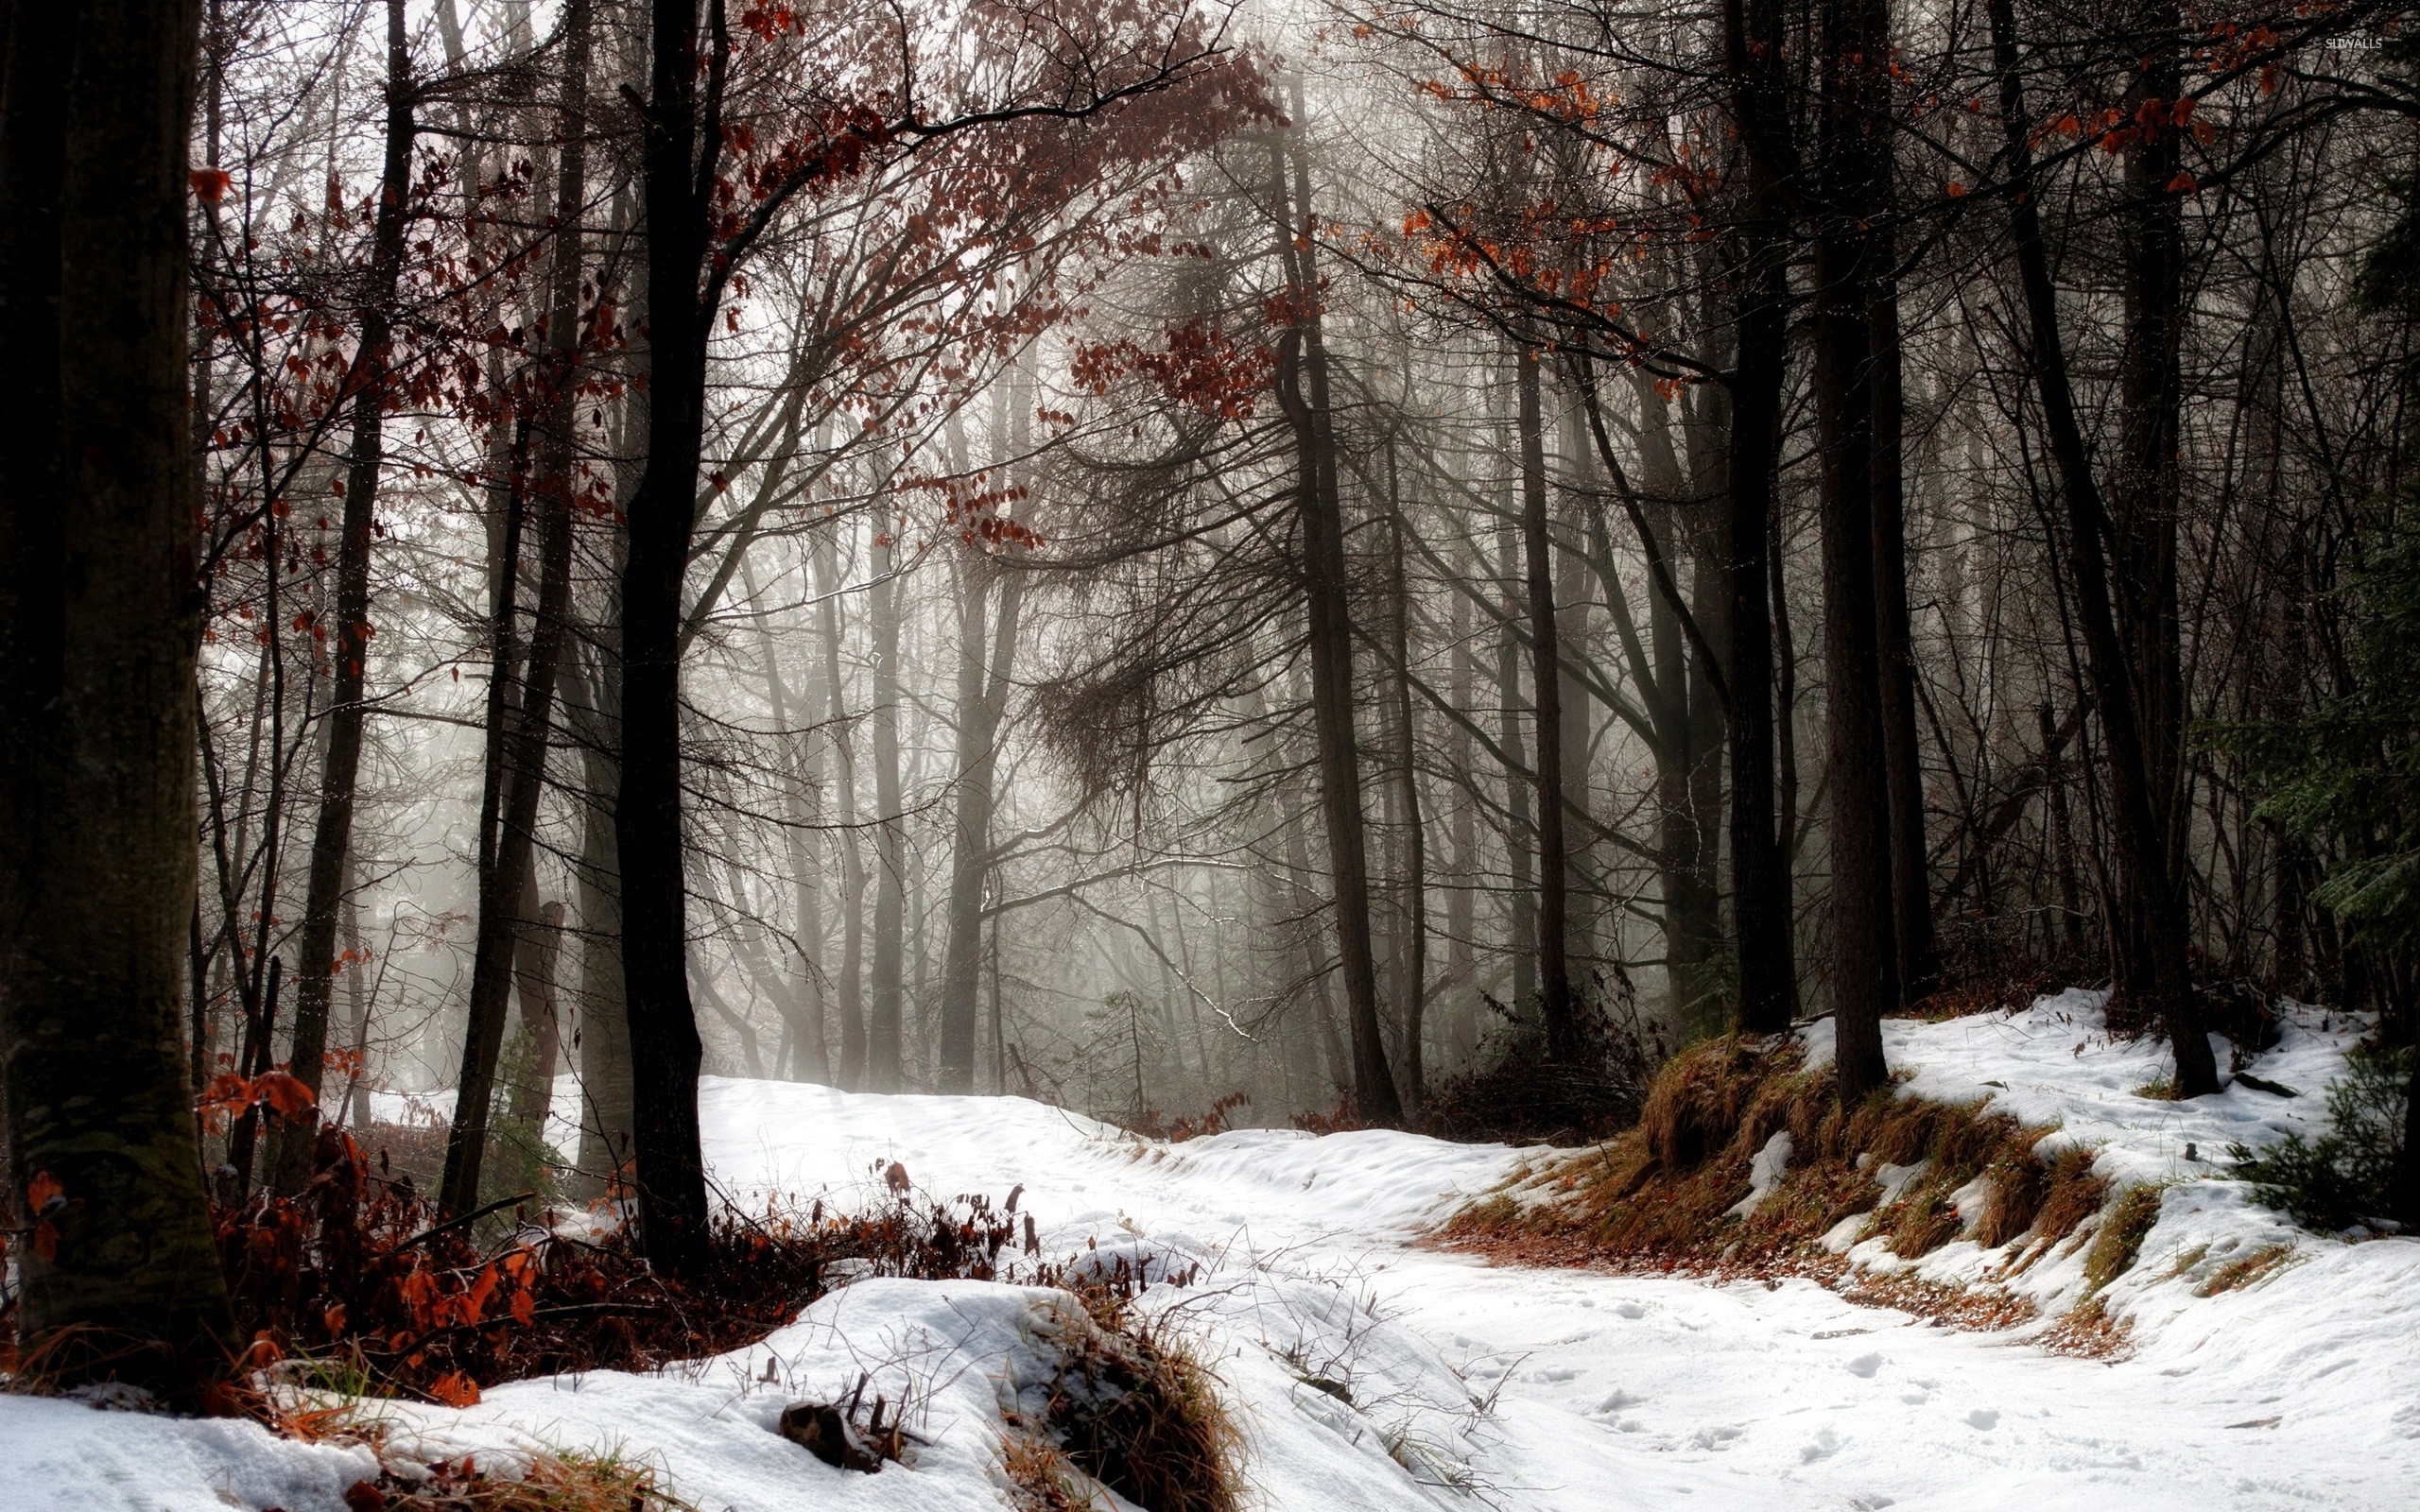 First snow over the autumn forest wallpaper - Nature wallpapers - #35920